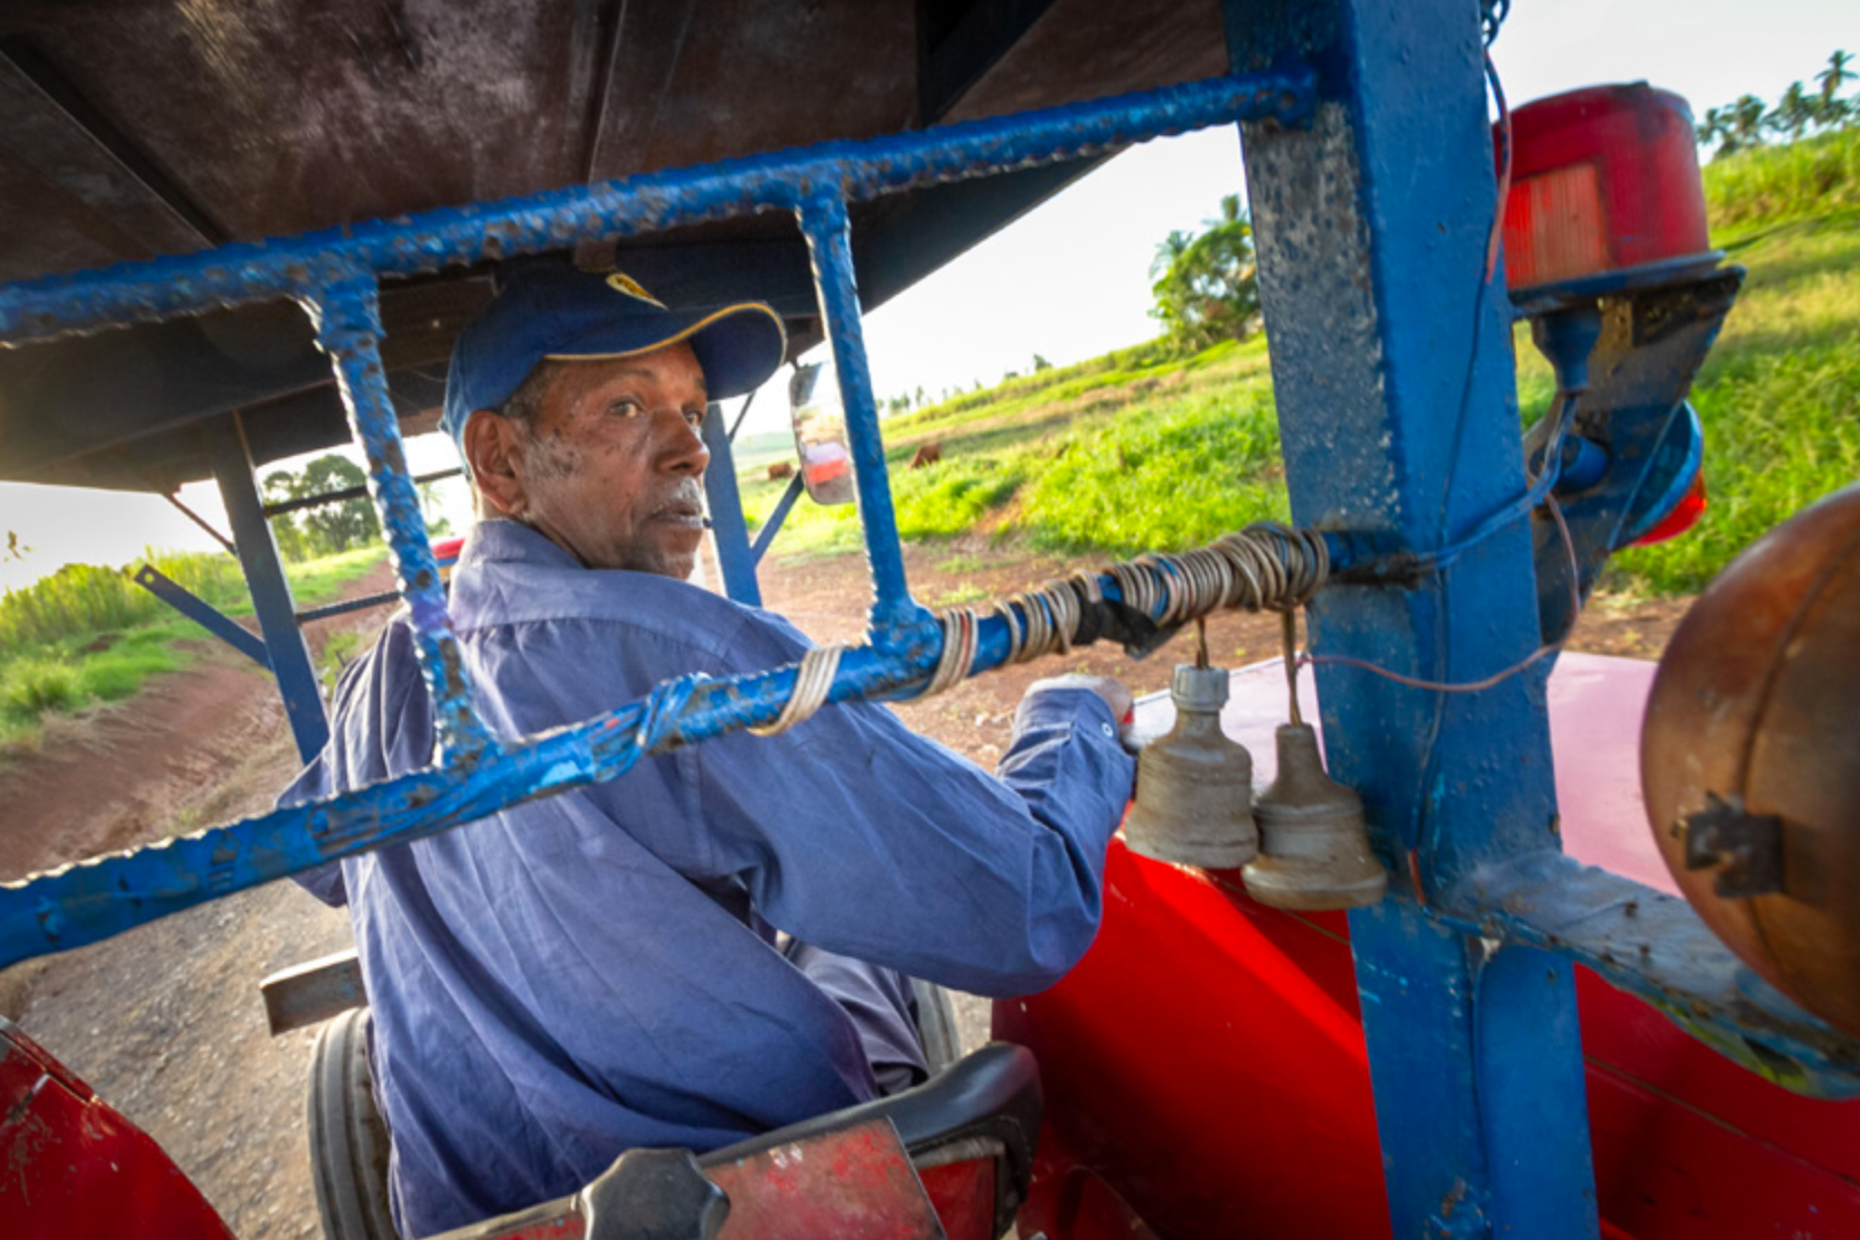 Bansi Lal cut cane for most of his life and now drives the tractor that pulls the loaded cane trucks to the rails for transportation to the Labasa mill. (Preston Merchant)